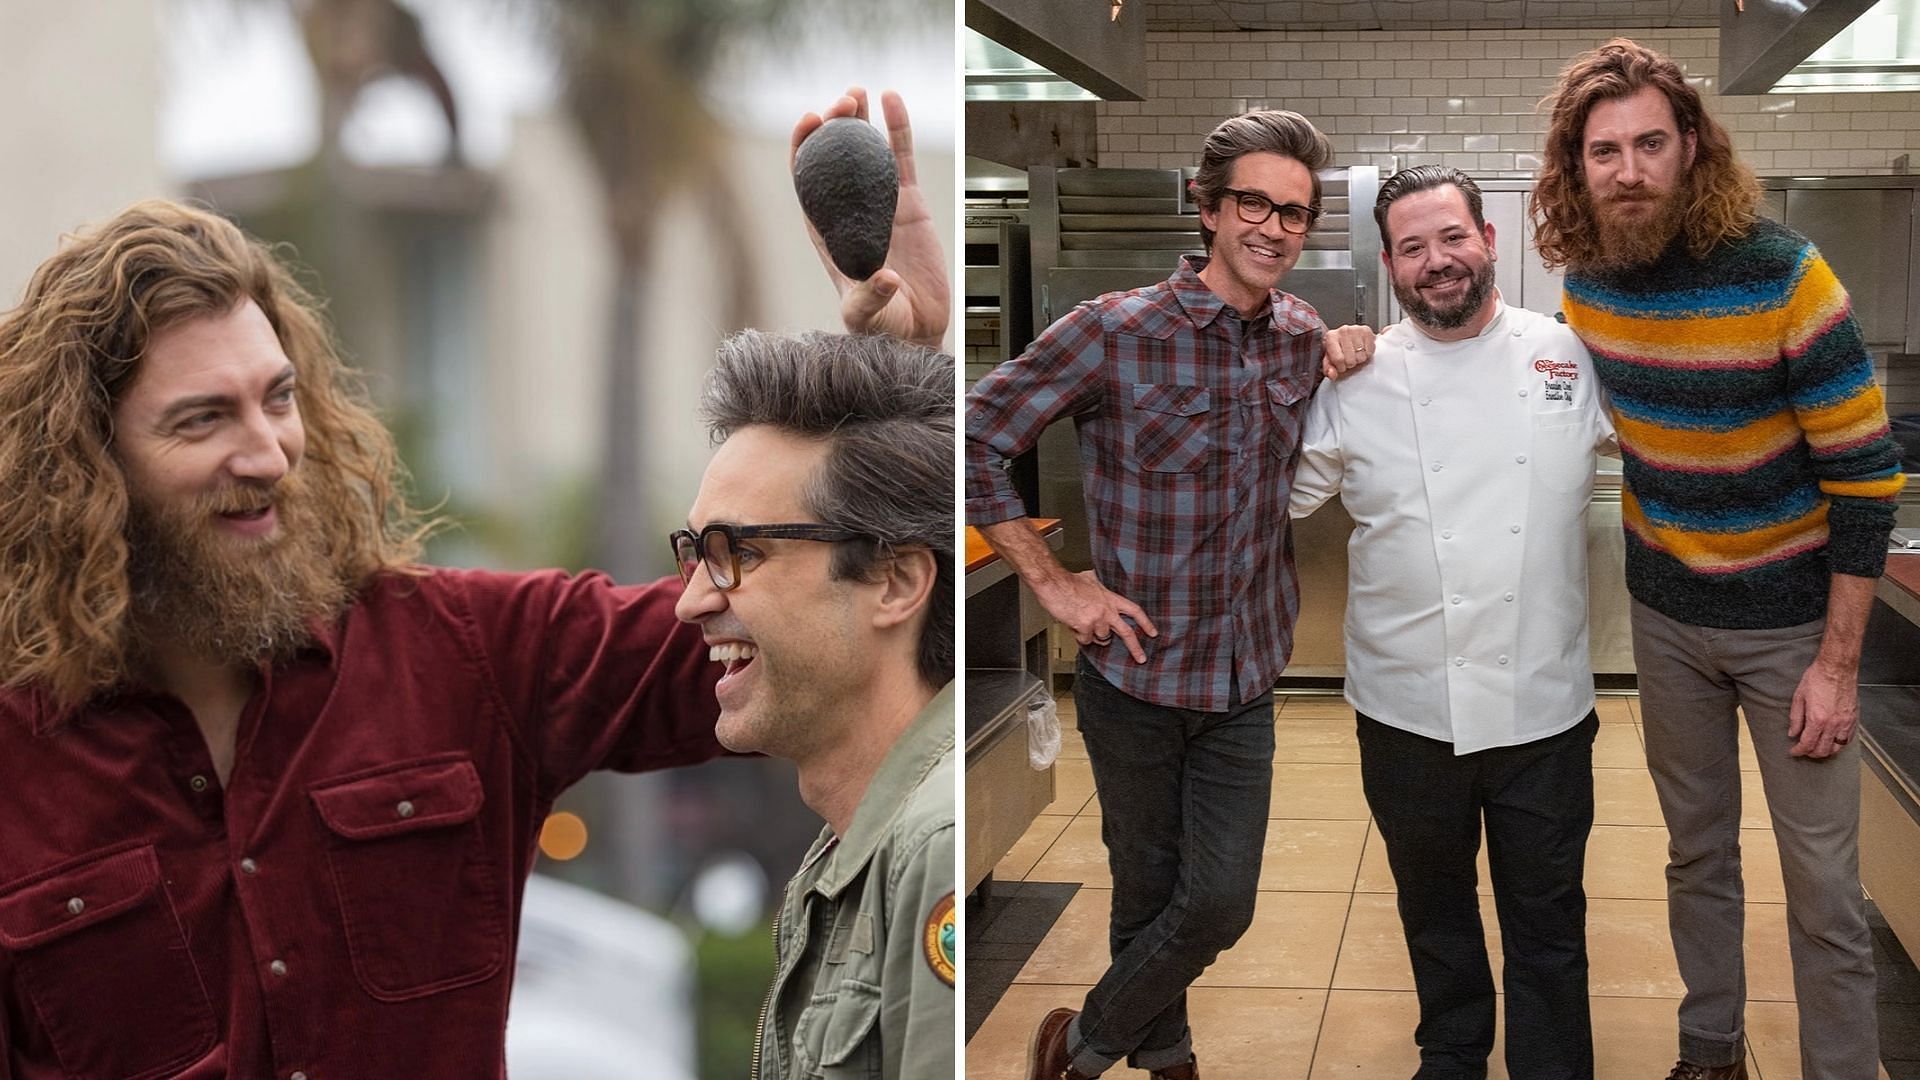 Inside Eats with Rhett &amp; Link explore The Cheesecake Factory in a brand new episode (Image via mythical/Instagram,@Cheesecake/Twitter)